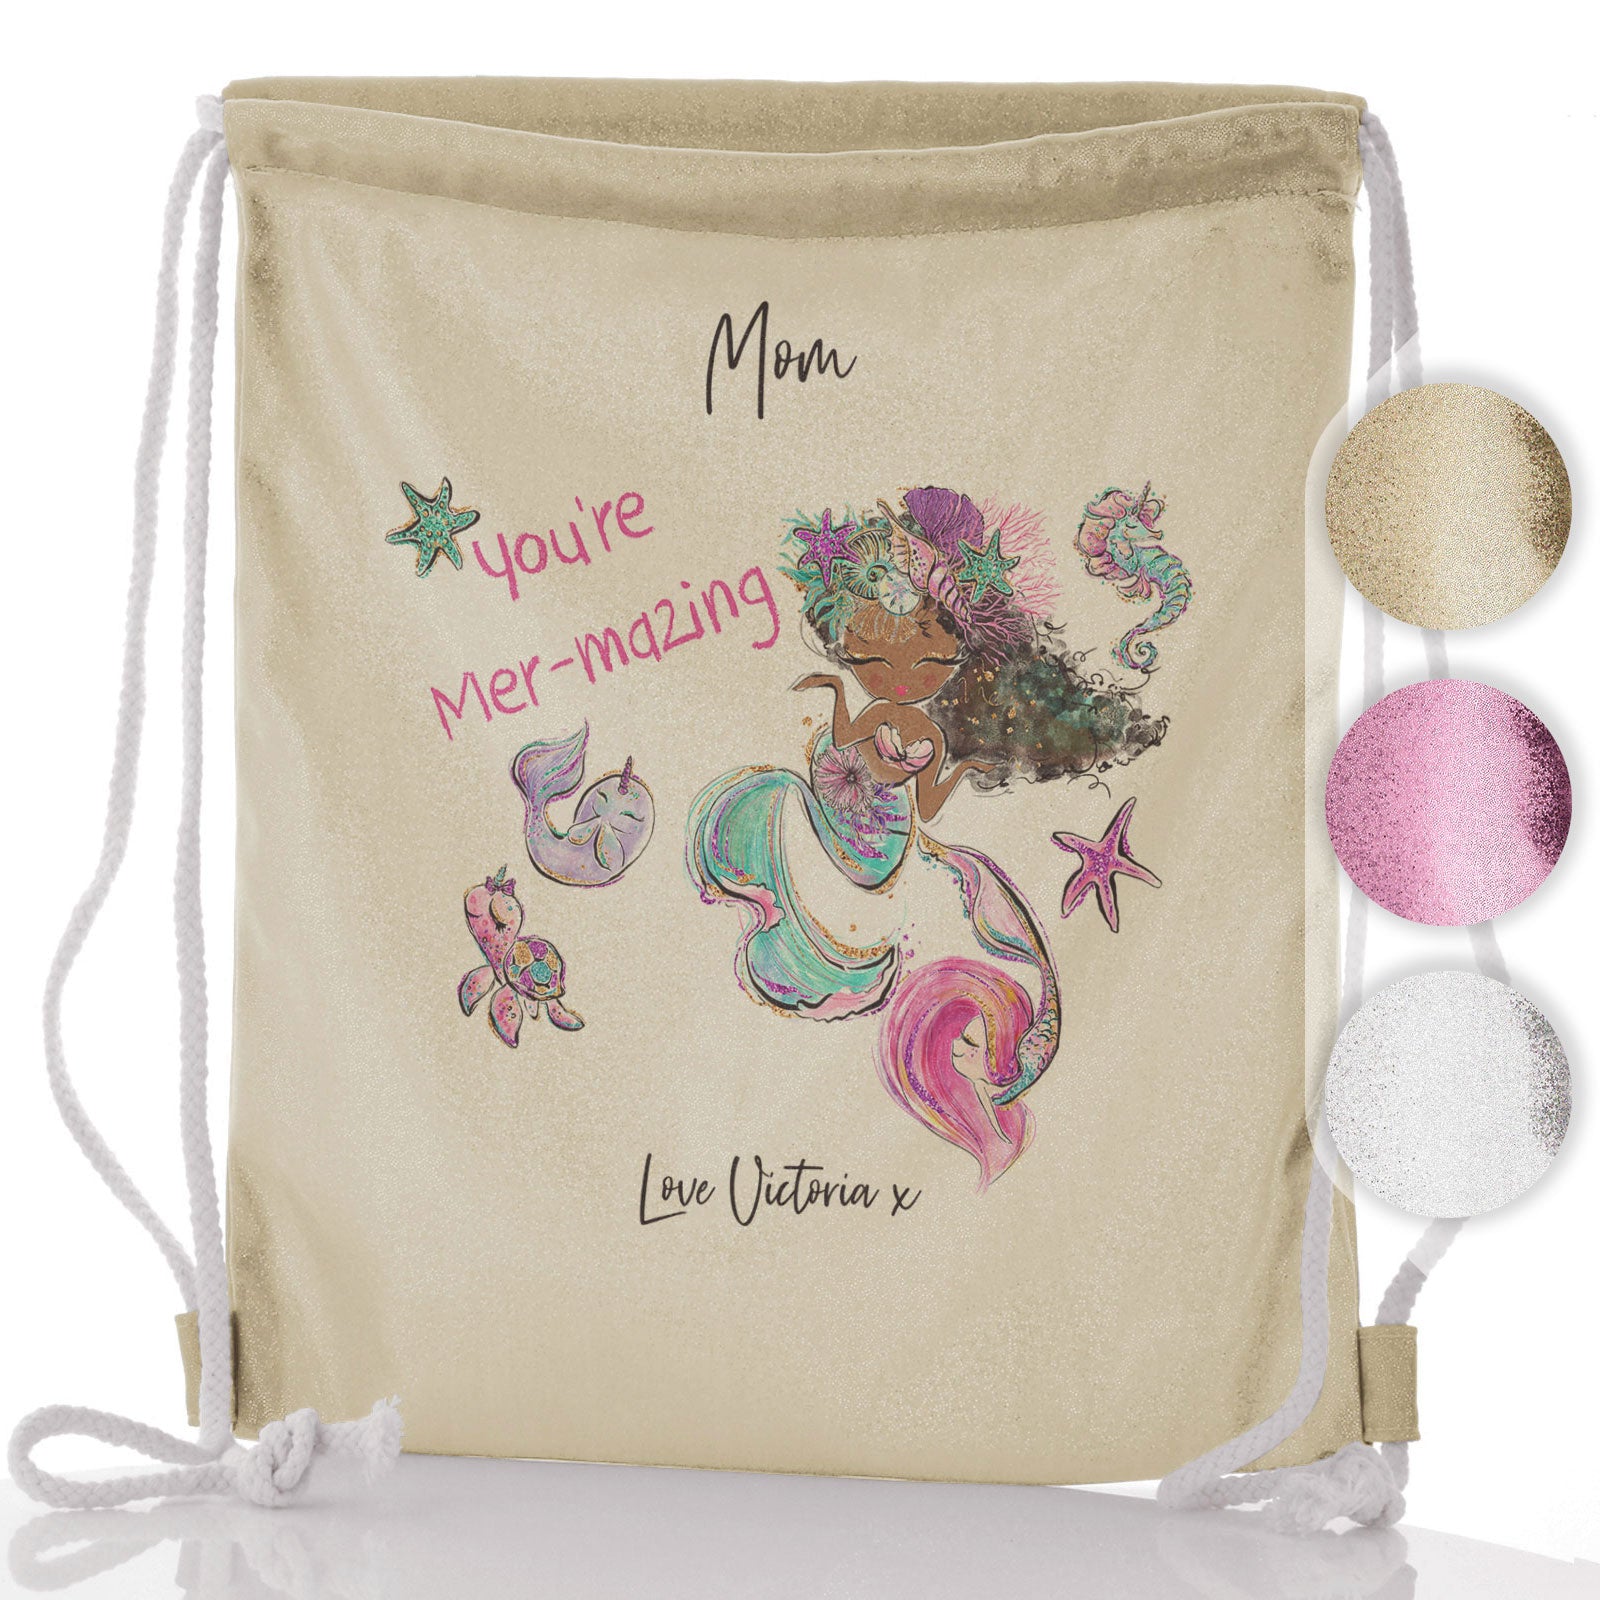 Personalised Glitter Drawstring Backpack with Stylish Text and Mermaid Love Message